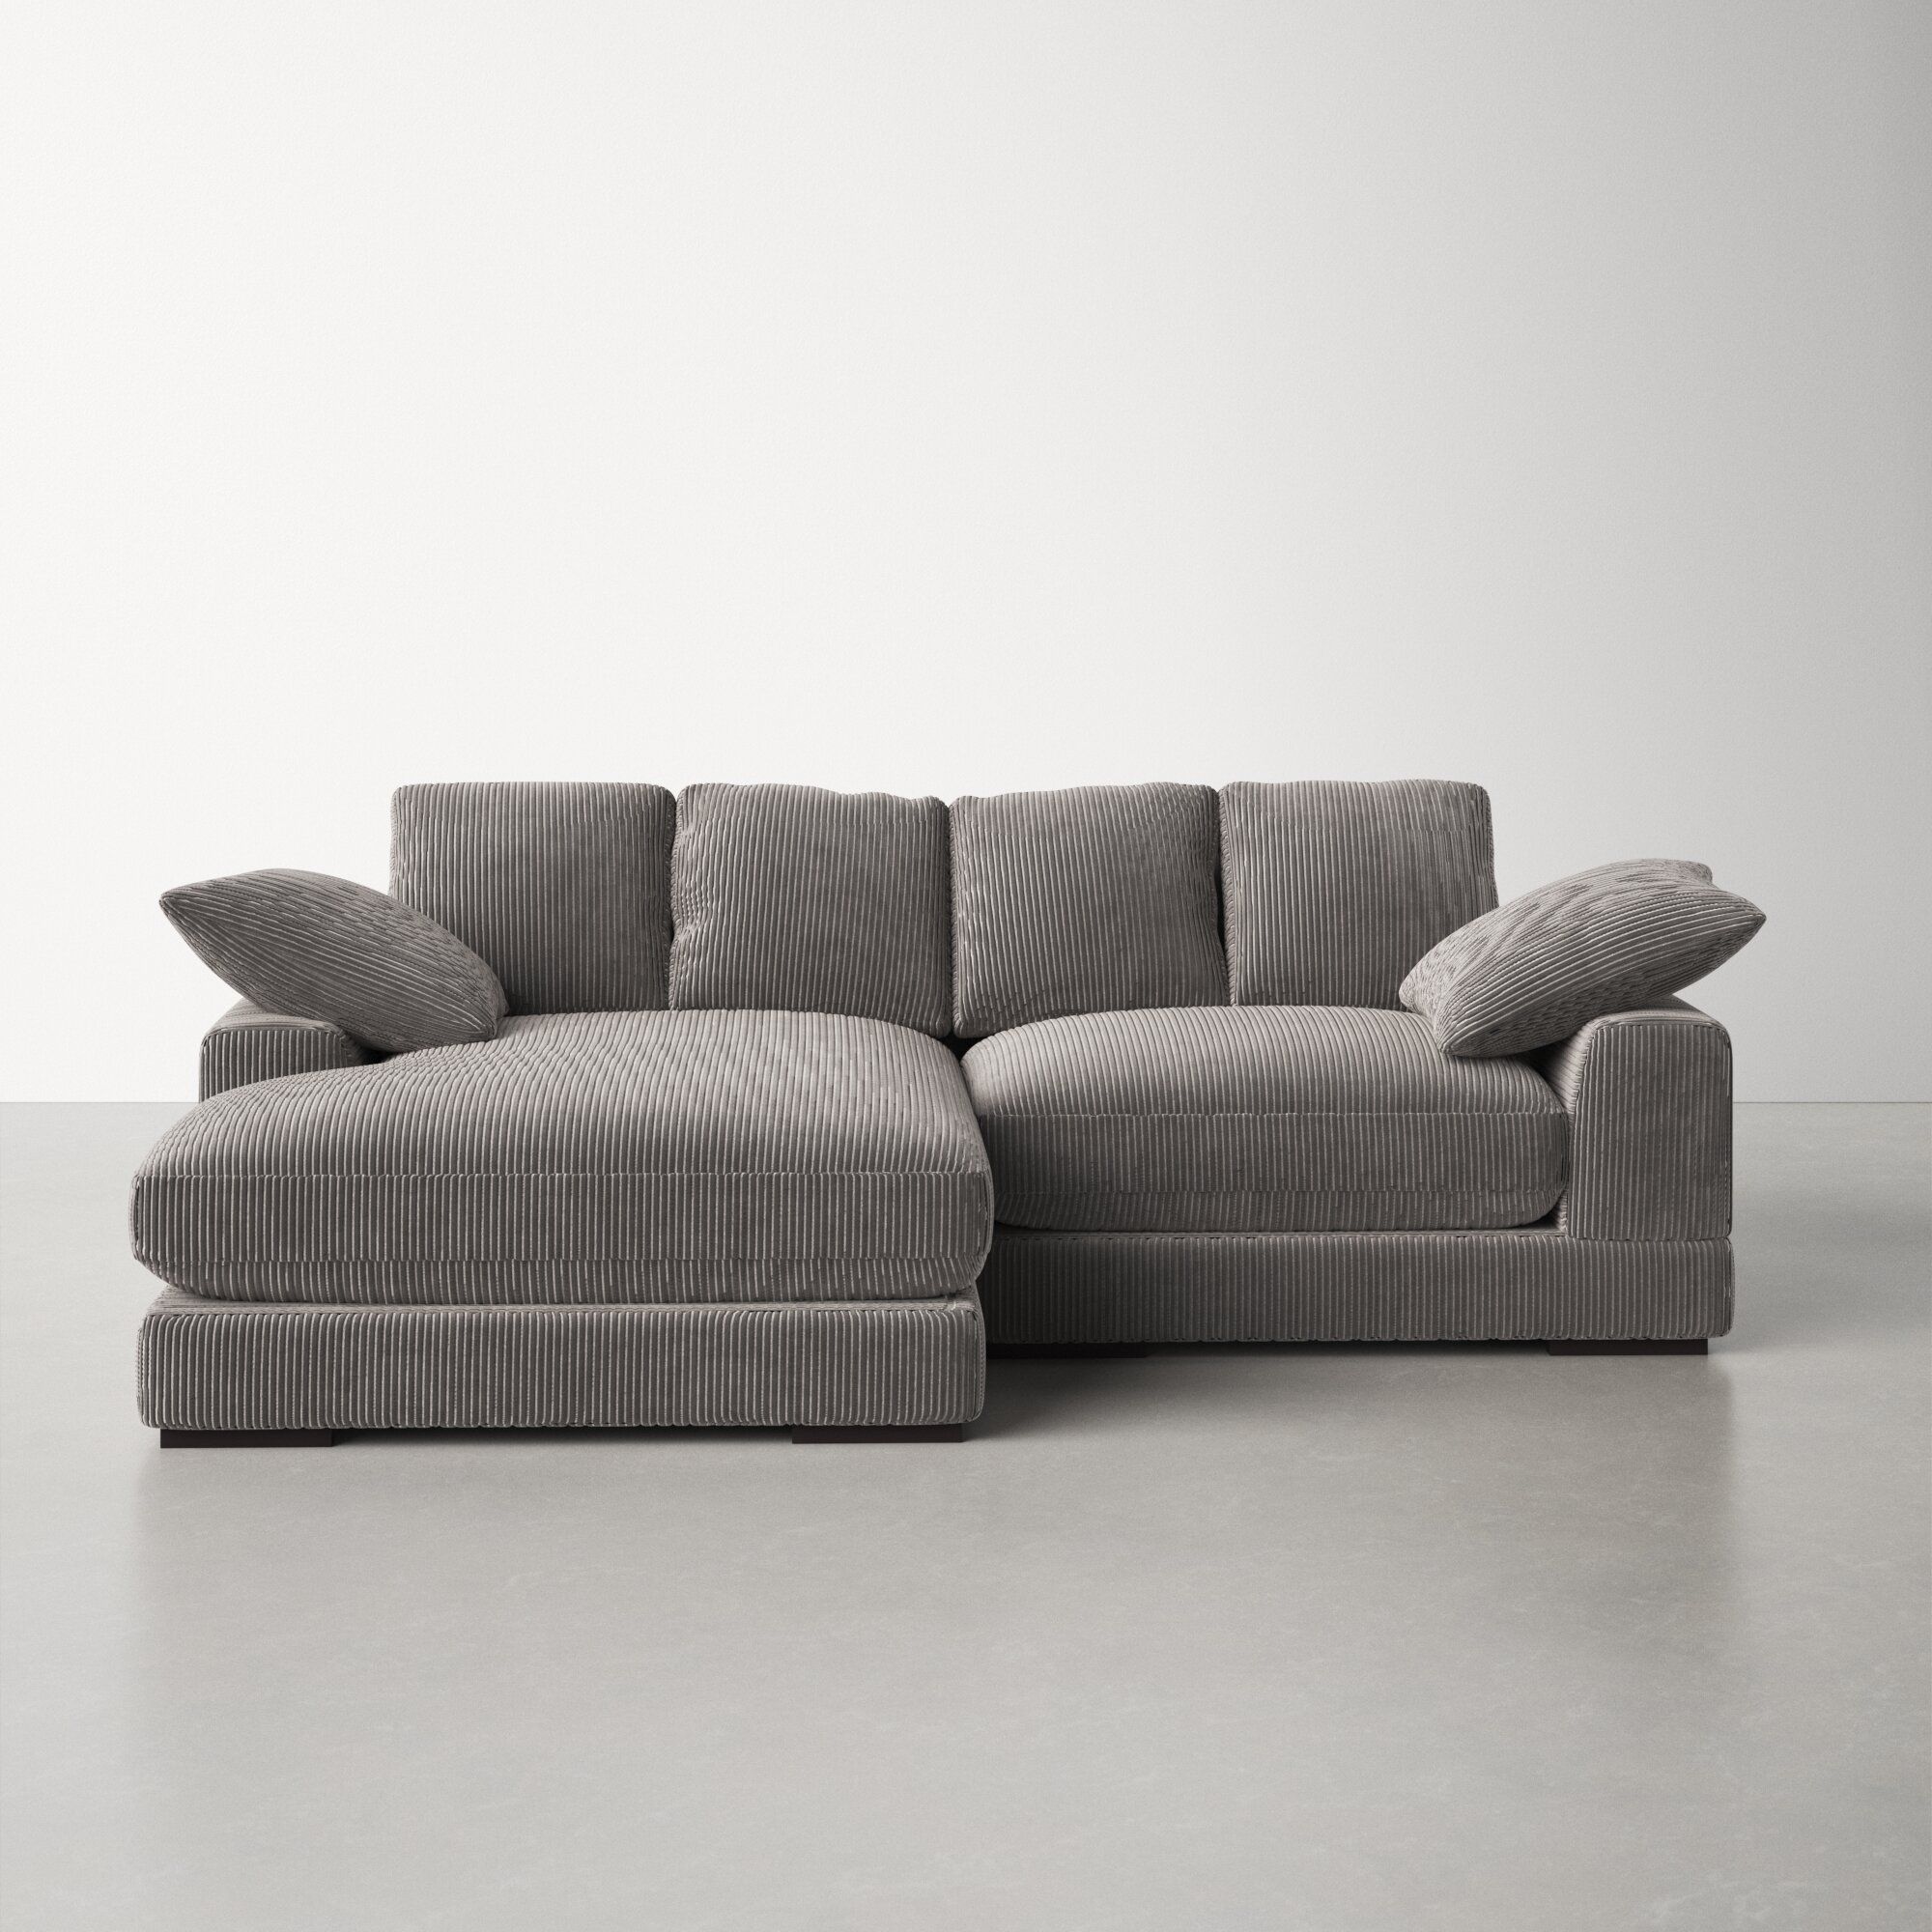 Lonsdale Reversible Chaise Sectional & Reviews | Allmodern Within Sectional Couches With Reversible Chaises (View 13 of 15)